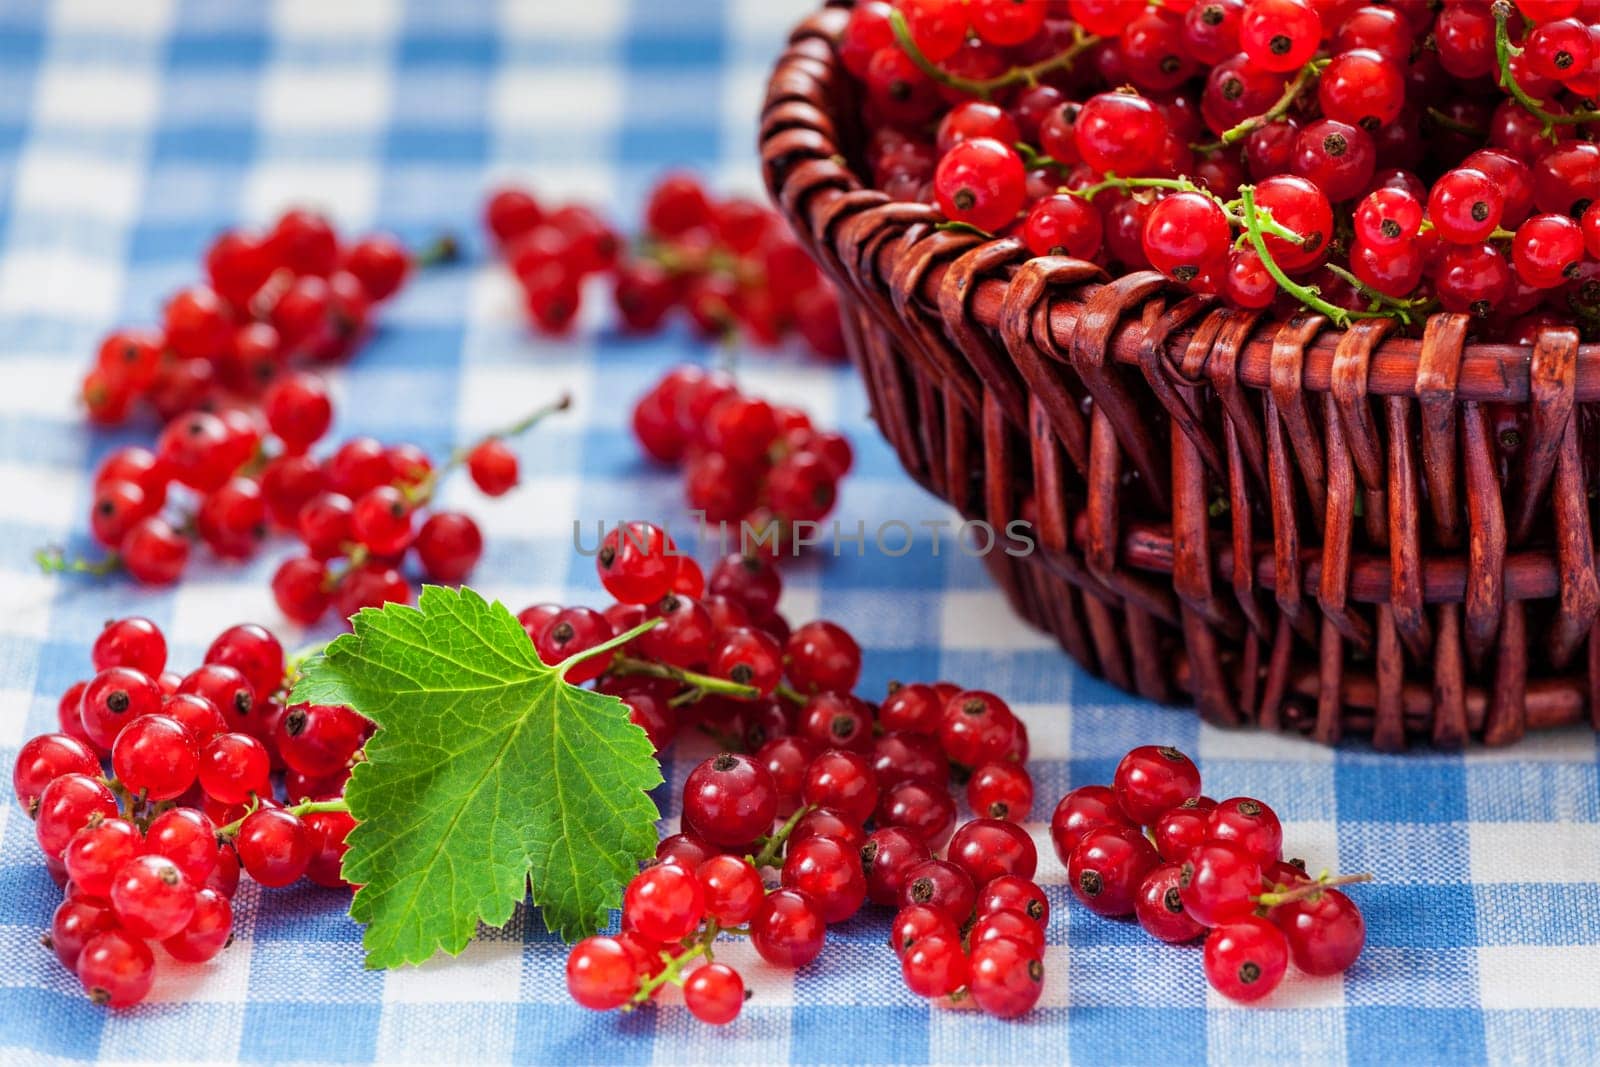 Redcurrant in wicker bowl on the table by dimol